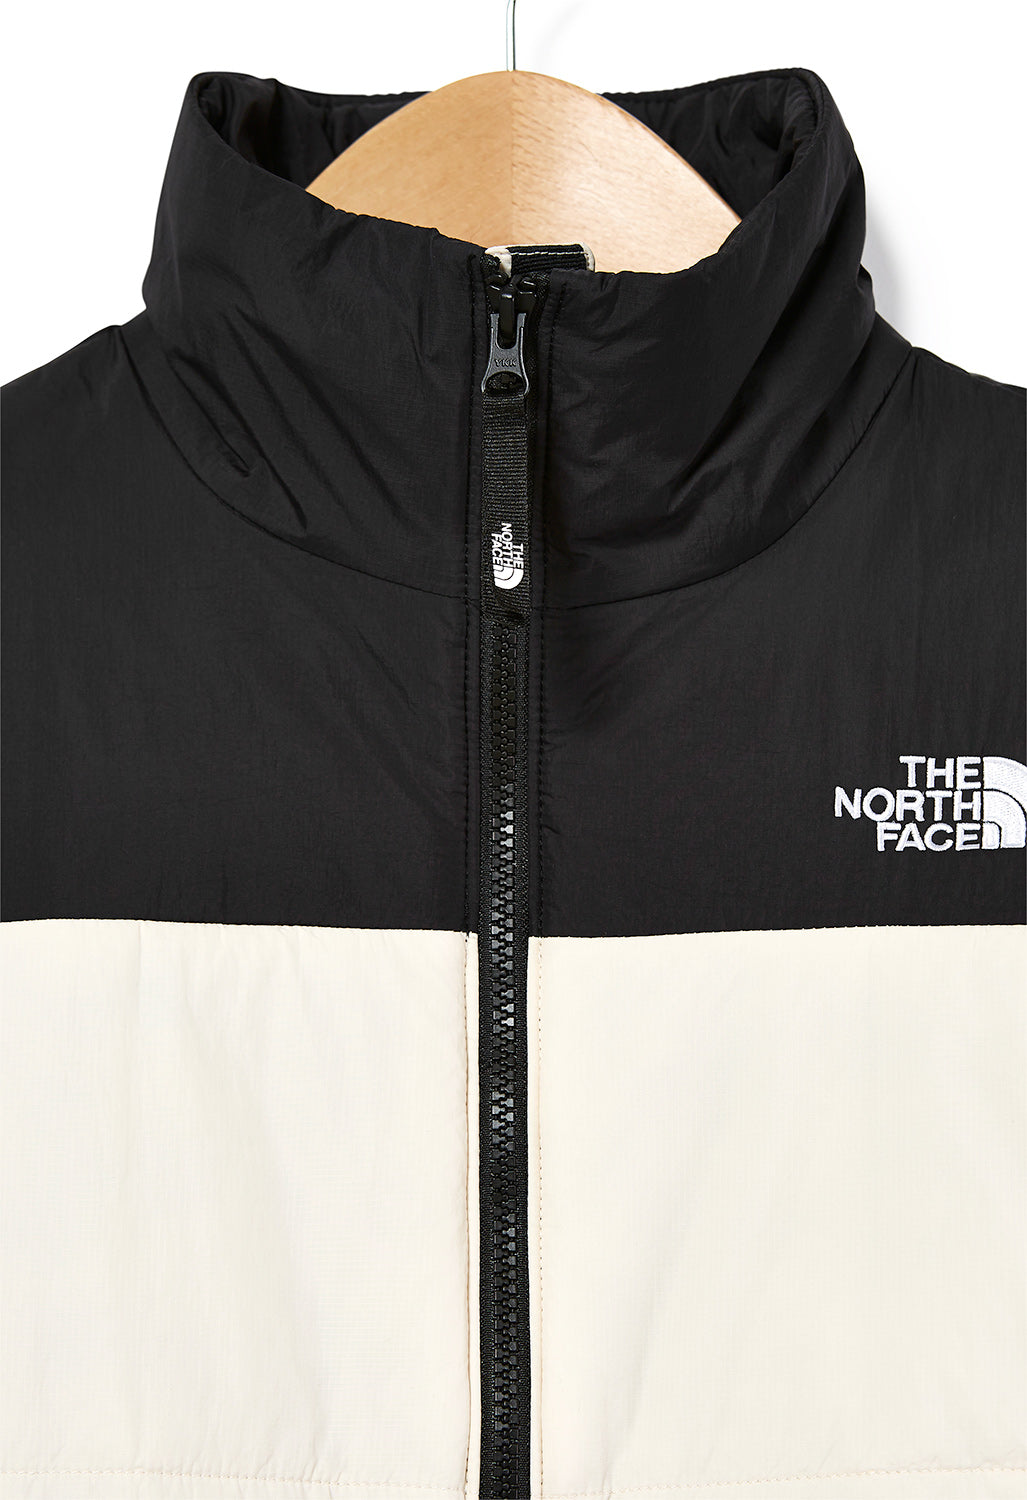 The North Face Gosei Women's Puffer Insulated Jacket - Pink Tint